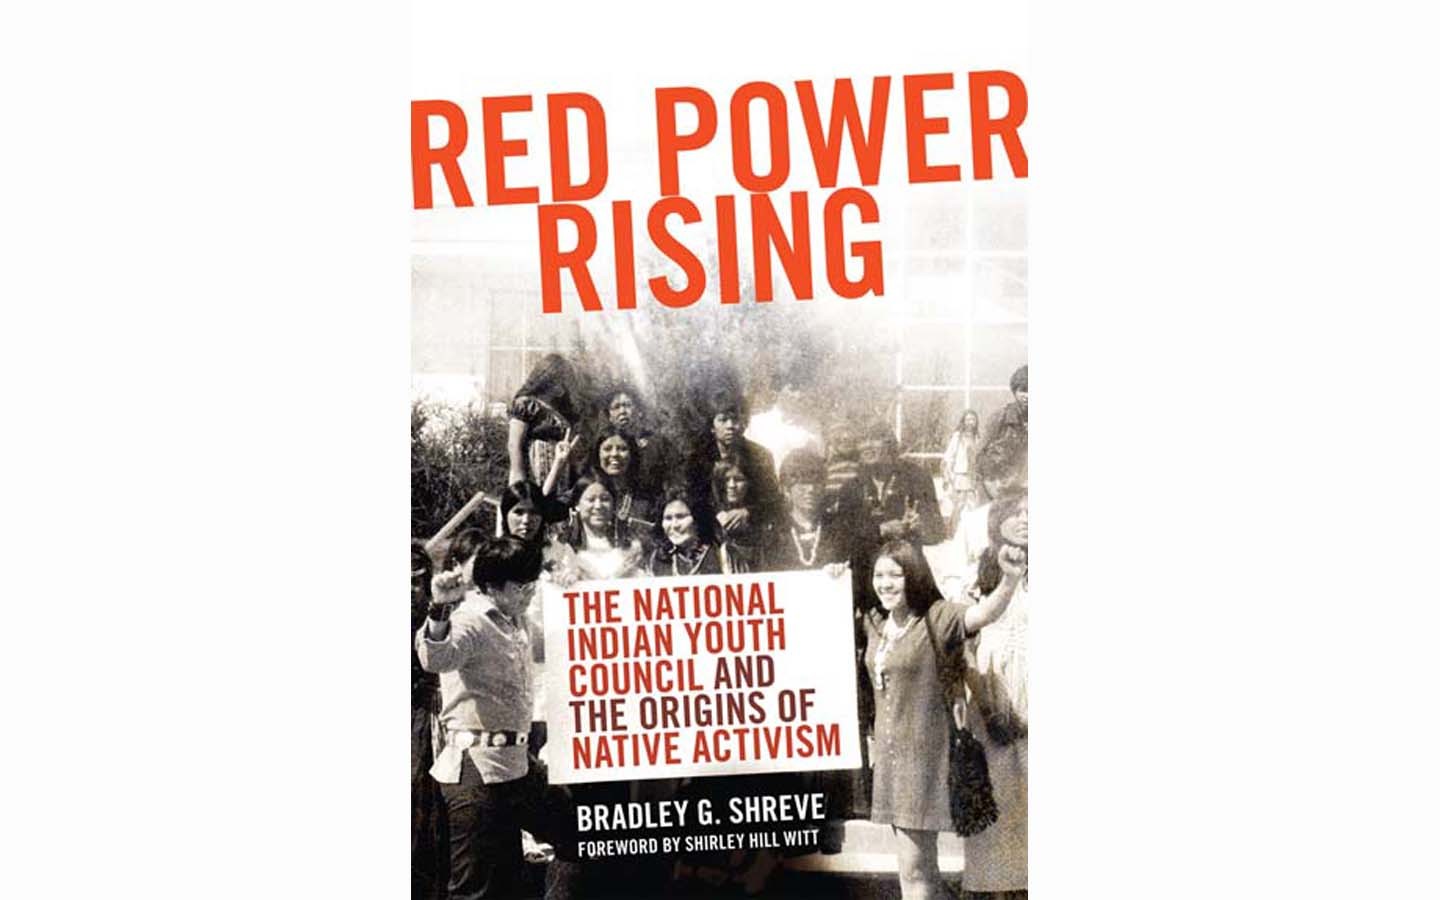 Red Power Rising: The National Indian Youth Council and the Origins of Native Activism - BY BRADLEY G. SHREVE - UNIVERSITY OF OKLAHOMA PRESS